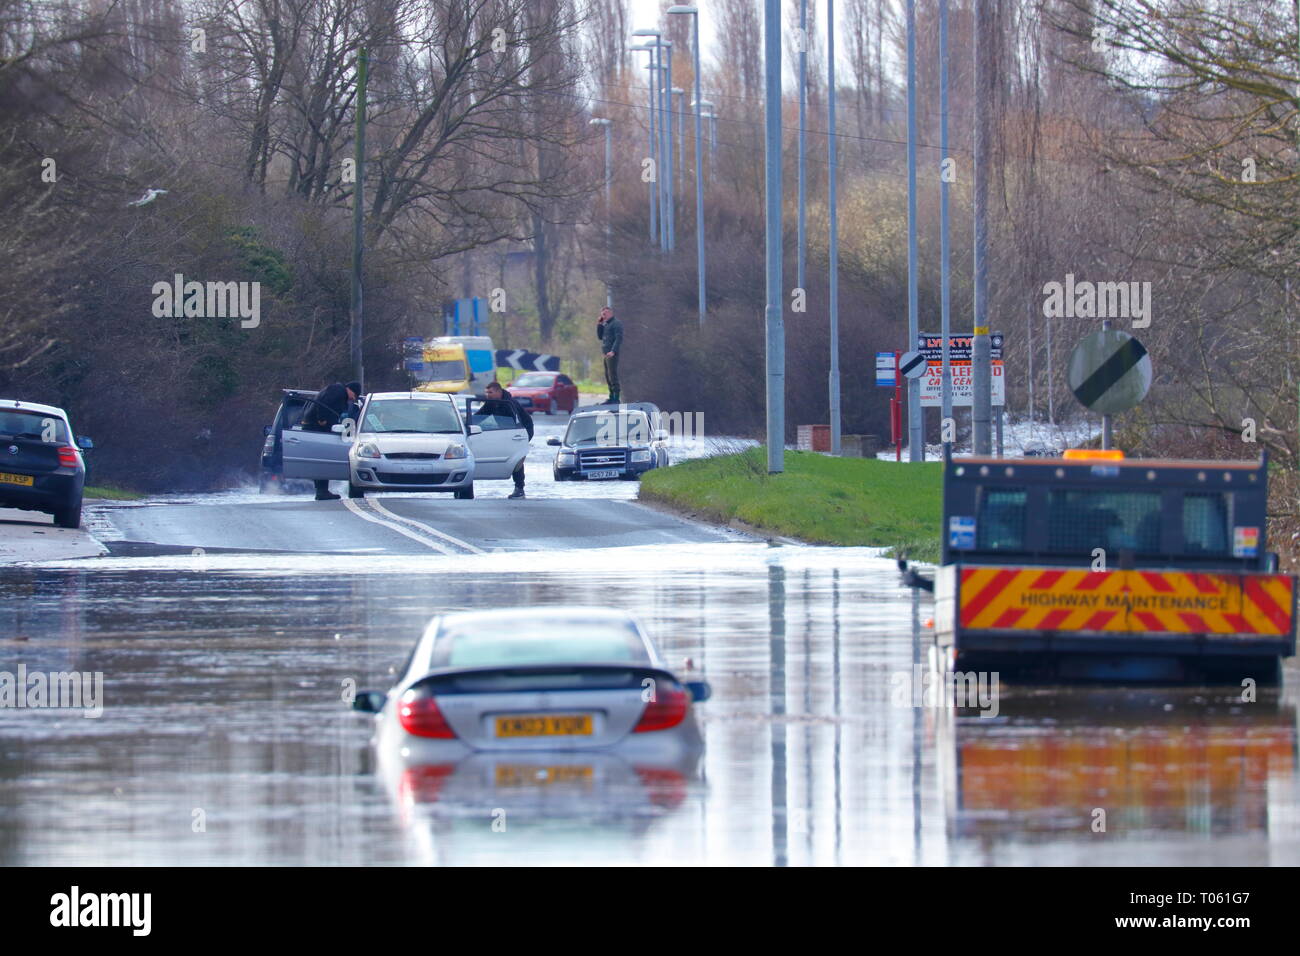 Castleford, UK. 17th March 2019.  Motorists abandon vehicles after getting stuck in flood water, between Castleford & Allerton Bywater. Credit Yorkshire Pics/Alamy Live News Stock Photo